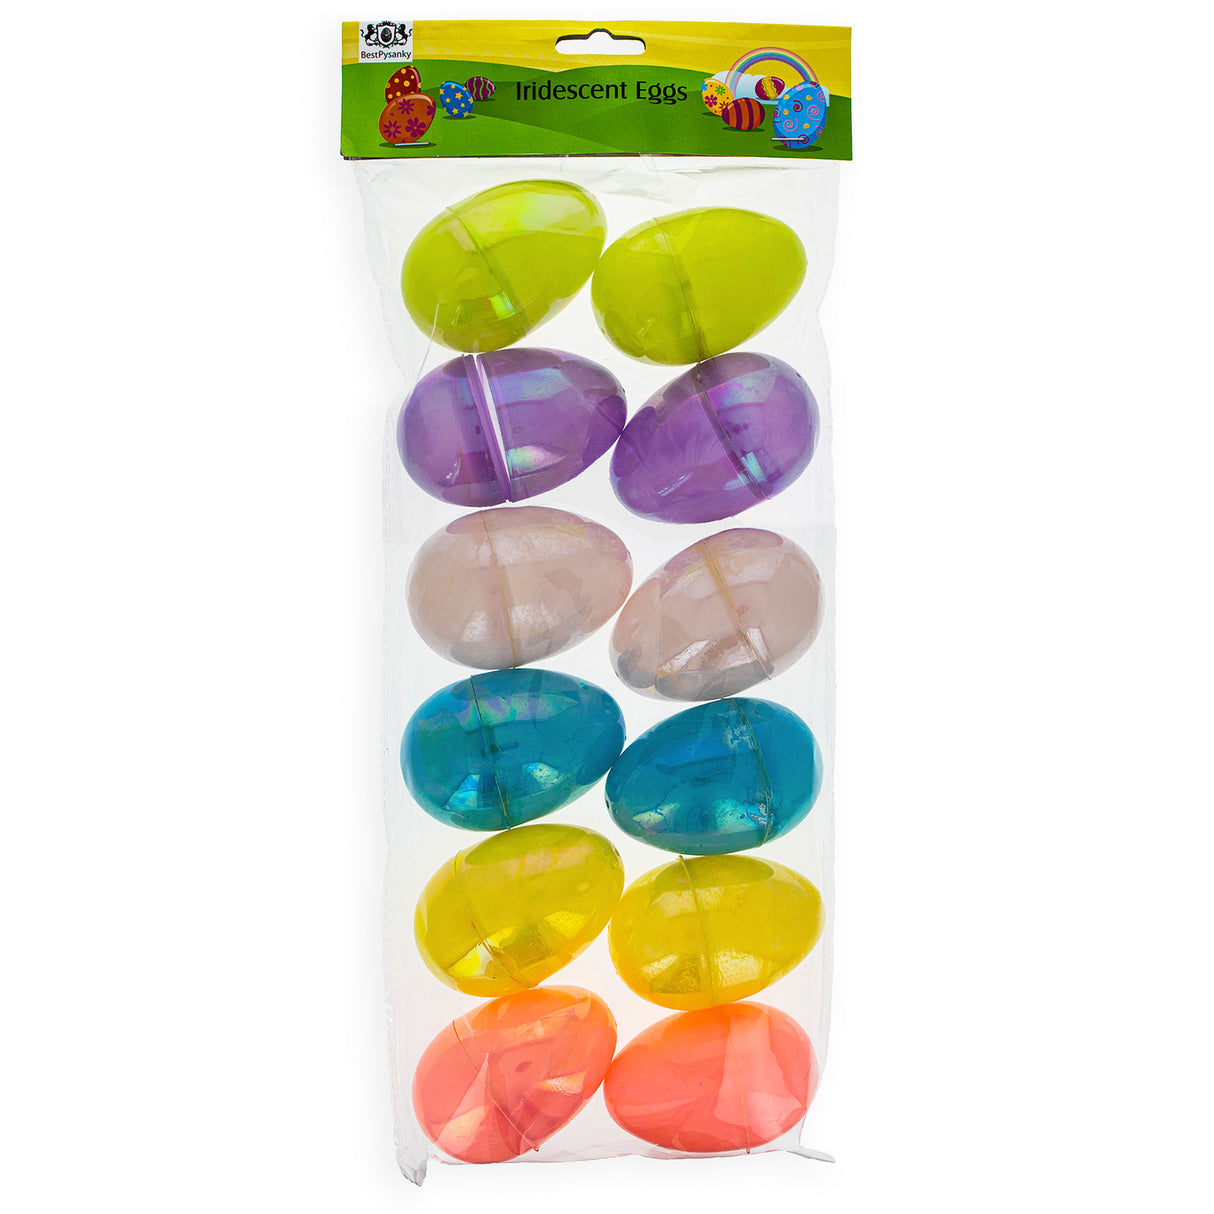 Rainbow Delight: Set of 12 Colorful Plastic Easter Eggs 3.05 Inches ,dimensions in inches: 3.05 x 2.1 x 2.1